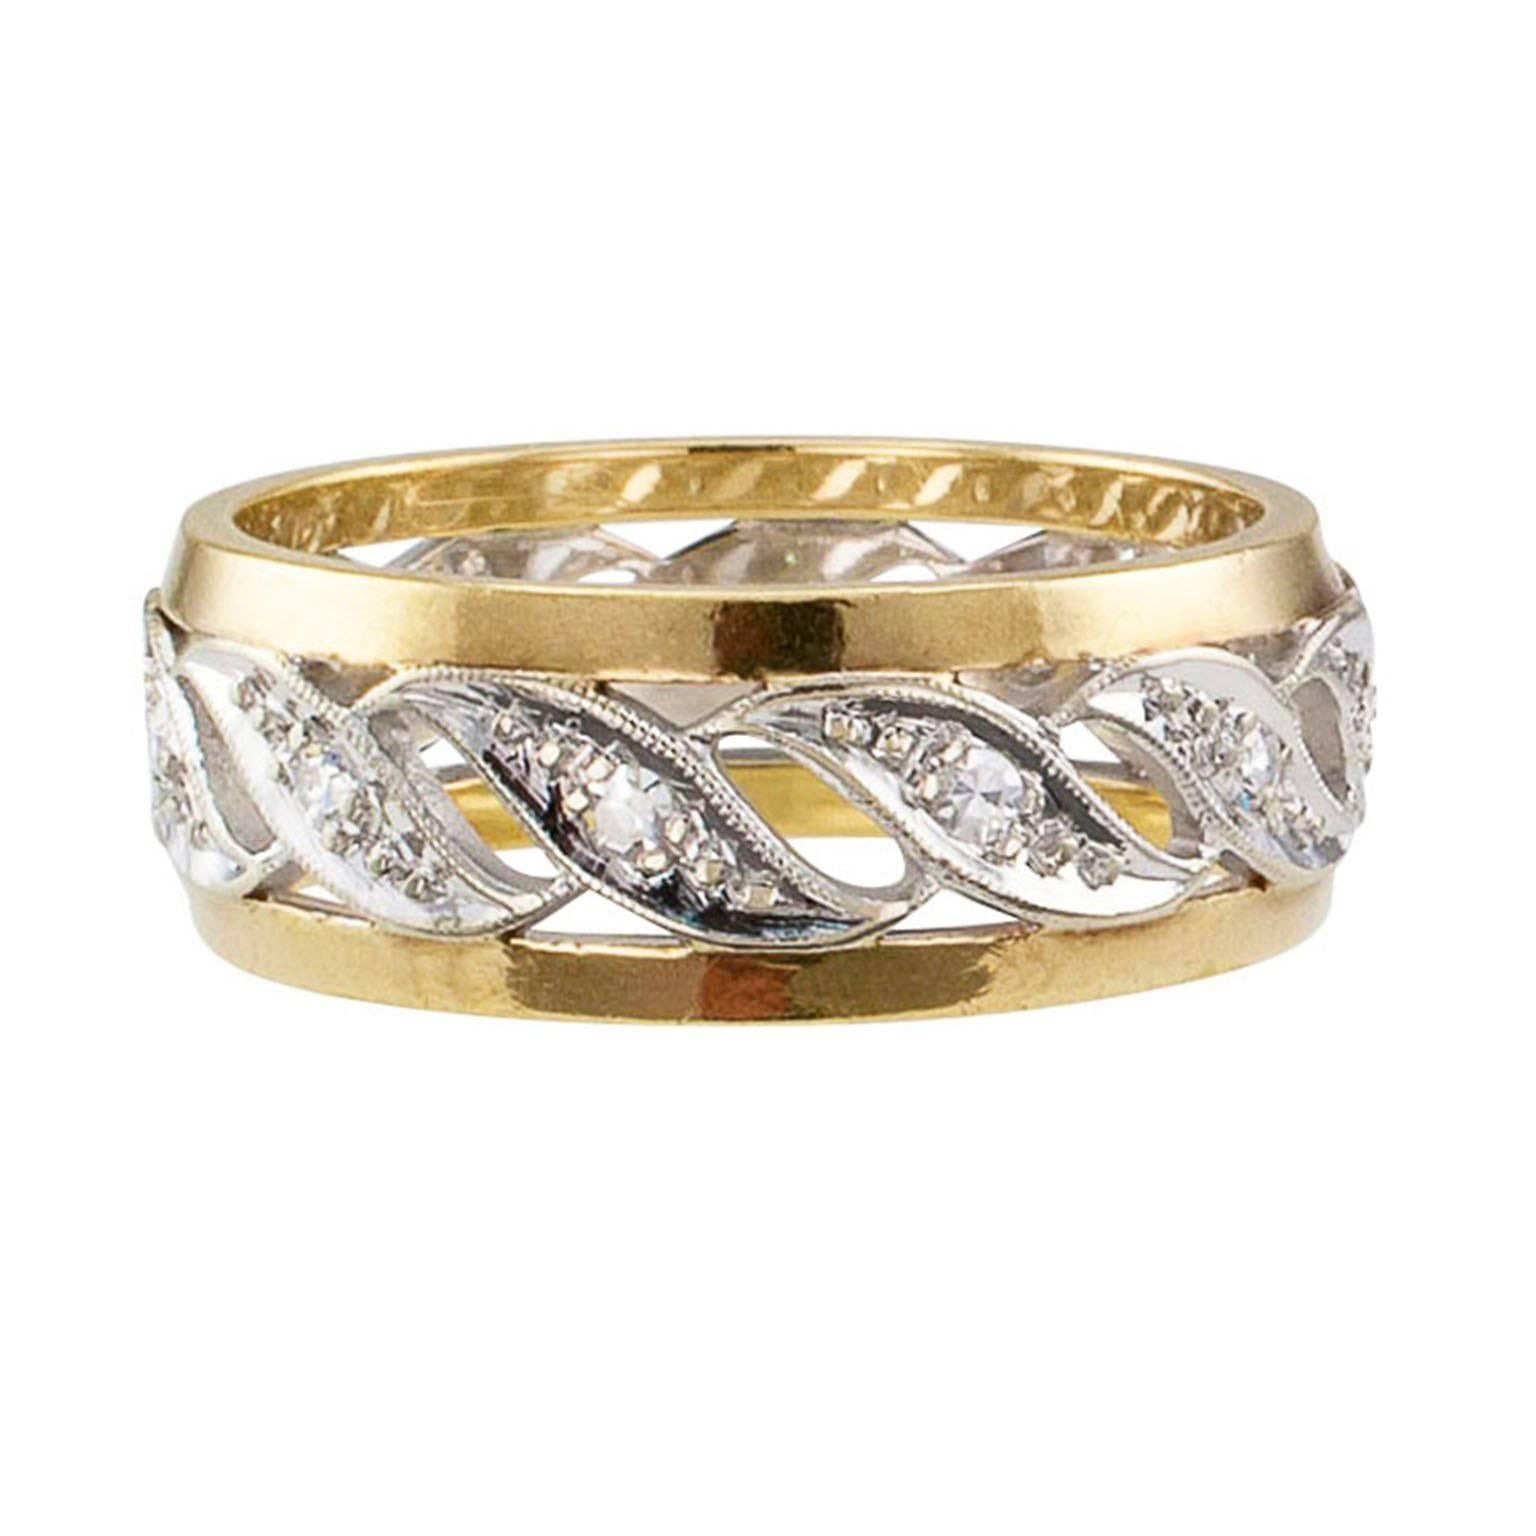 1940s Two tone Gold Diamond Wedding Band

Retro two tone 14 karat gold and diamond wedding band circa 1940.   A continuous row of open work white gold paisley motifs, each centering a single-cut diamond, between parallel bands of yellow gold.  A